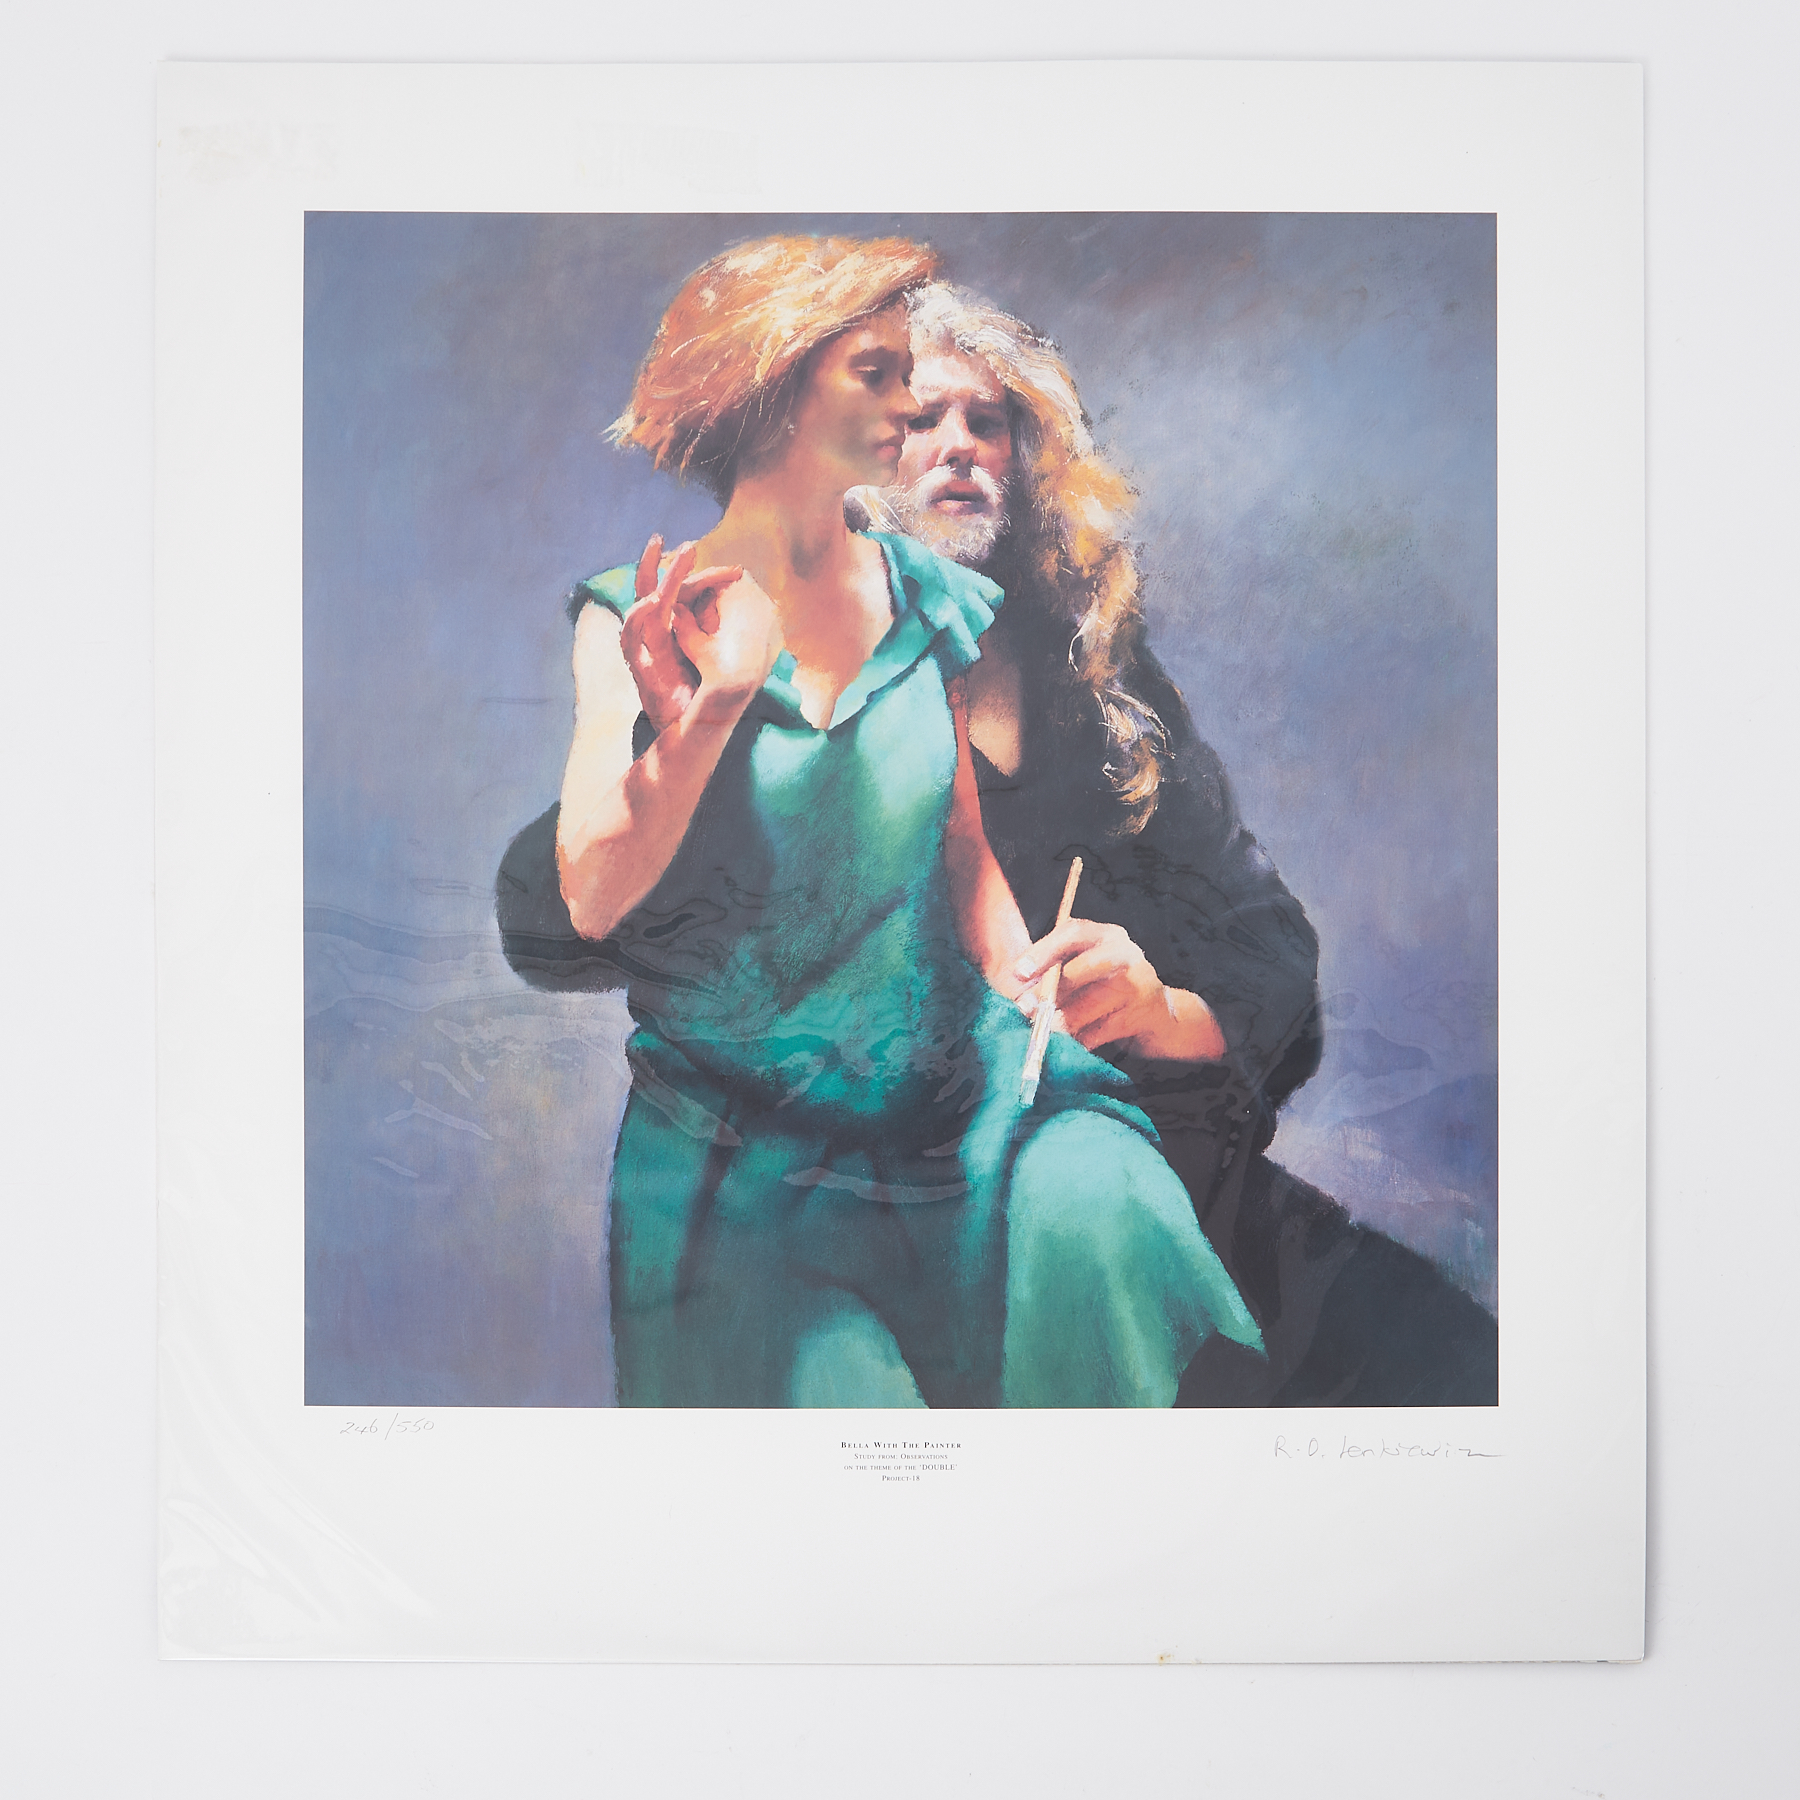 Robert Lenkiewicz (1941-2002) 'Painter with Bella' signed limited edition print 246/500, 50cm x